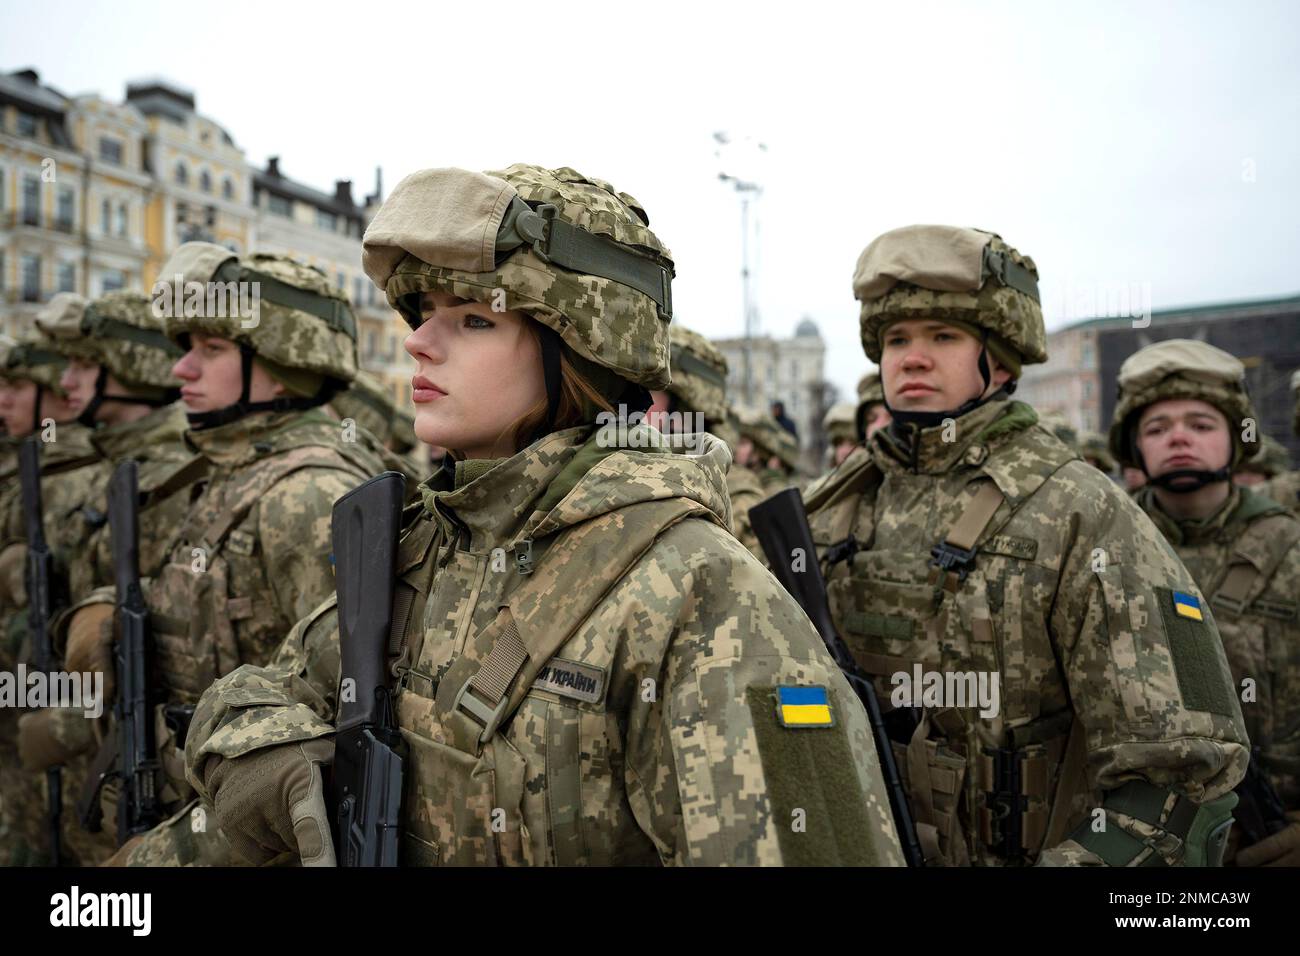 Kyiv, Ukraine. 24th Feb, 2023. Ukrainian soldiers stand at attention during the 1st anniversary of the Russian invasion at Saint Sophia's Square, February 24, 2023 in Kyiv, Ukraine. Credit: Pool Photo/Ukrainian Presidential Press Office/Alamy Live News Stock Photo